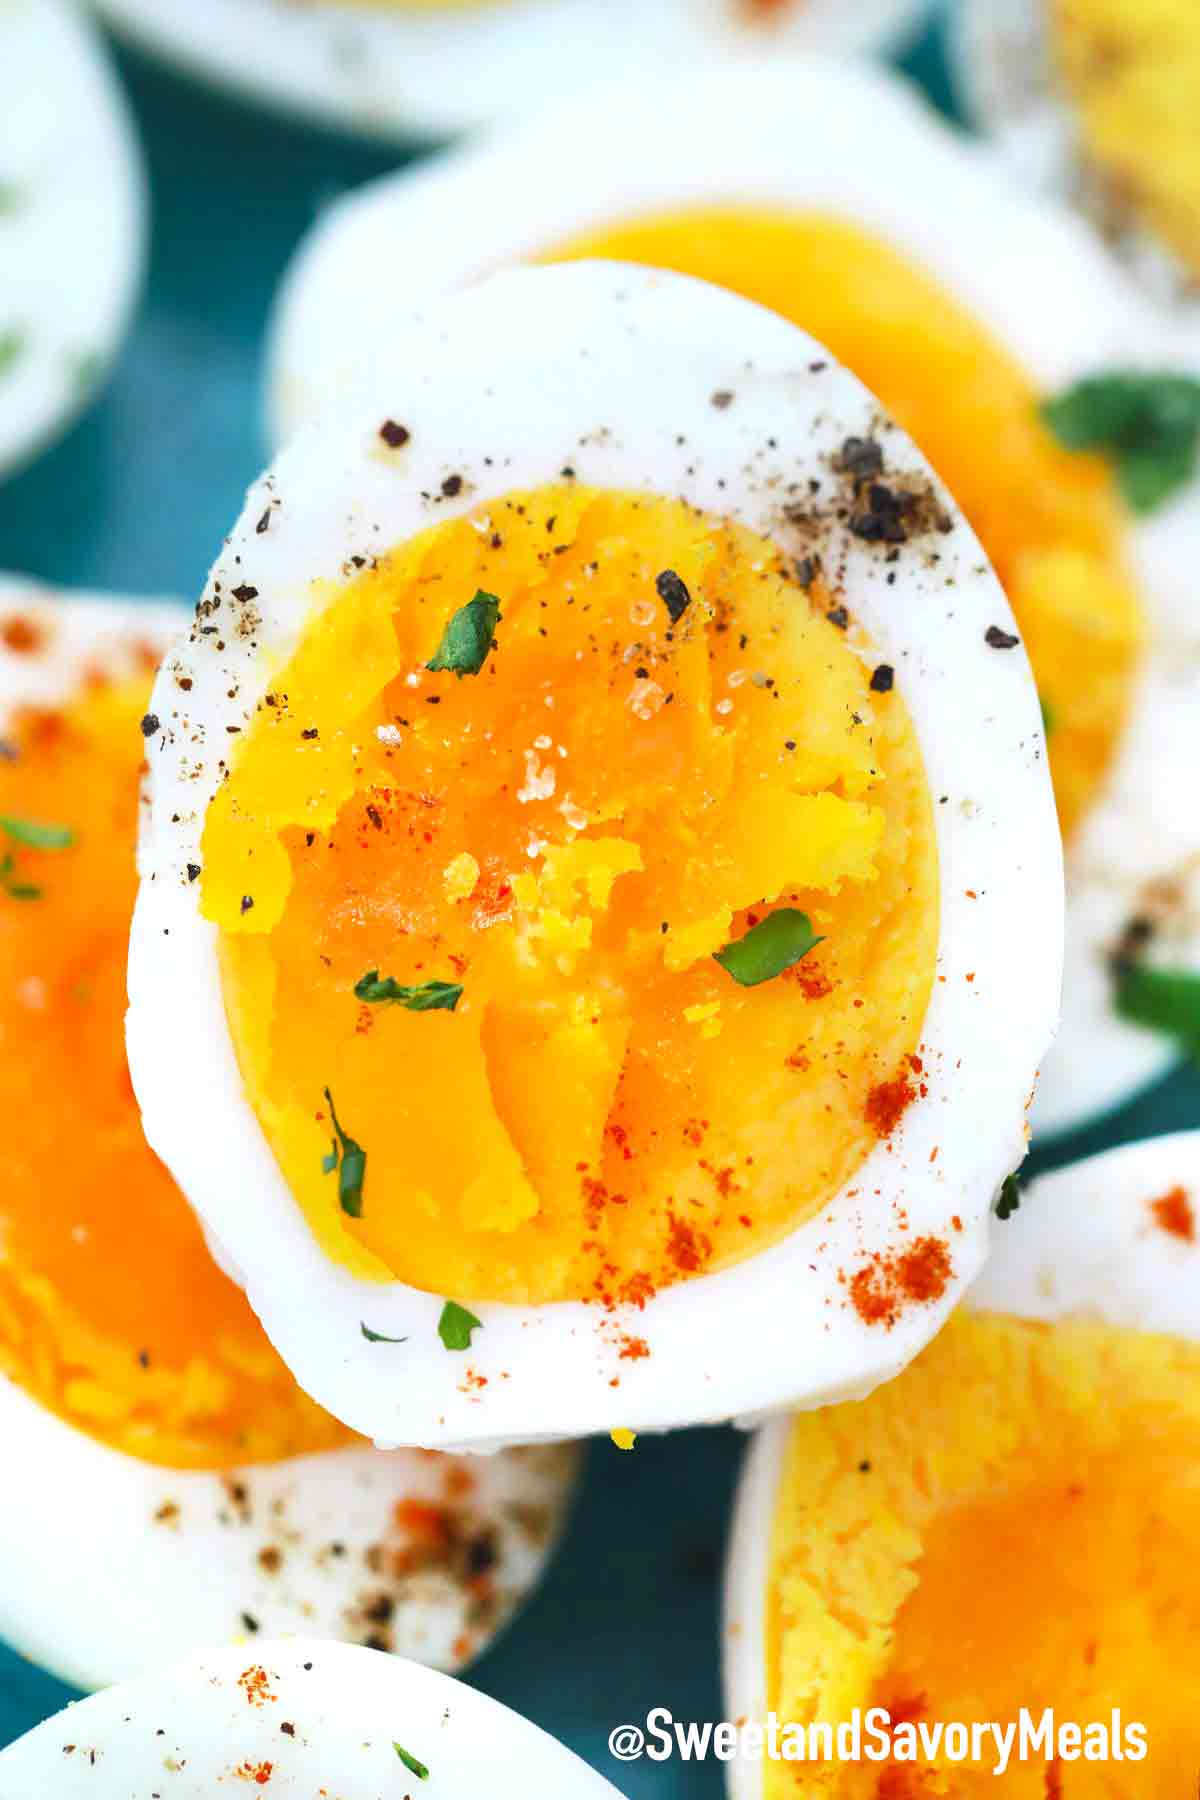 How to make Perfect Air Fryer Eggs. Hard or Soft - Daily Yum